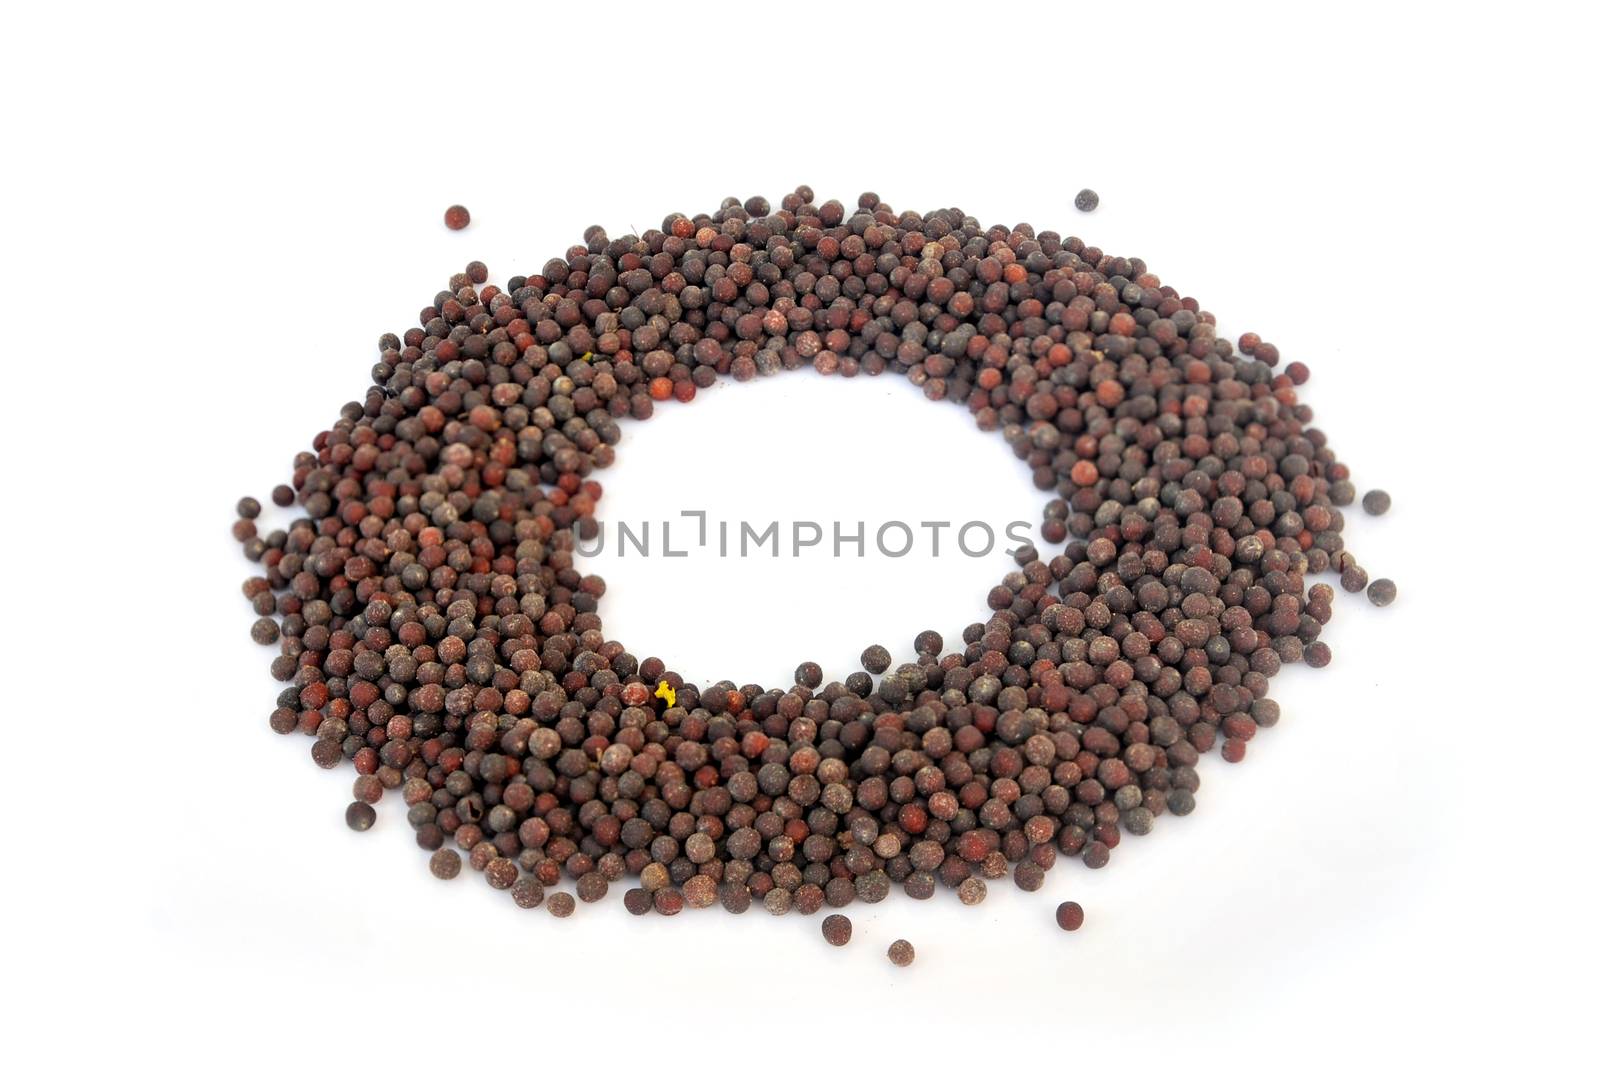 Cantonese seeds on white background.